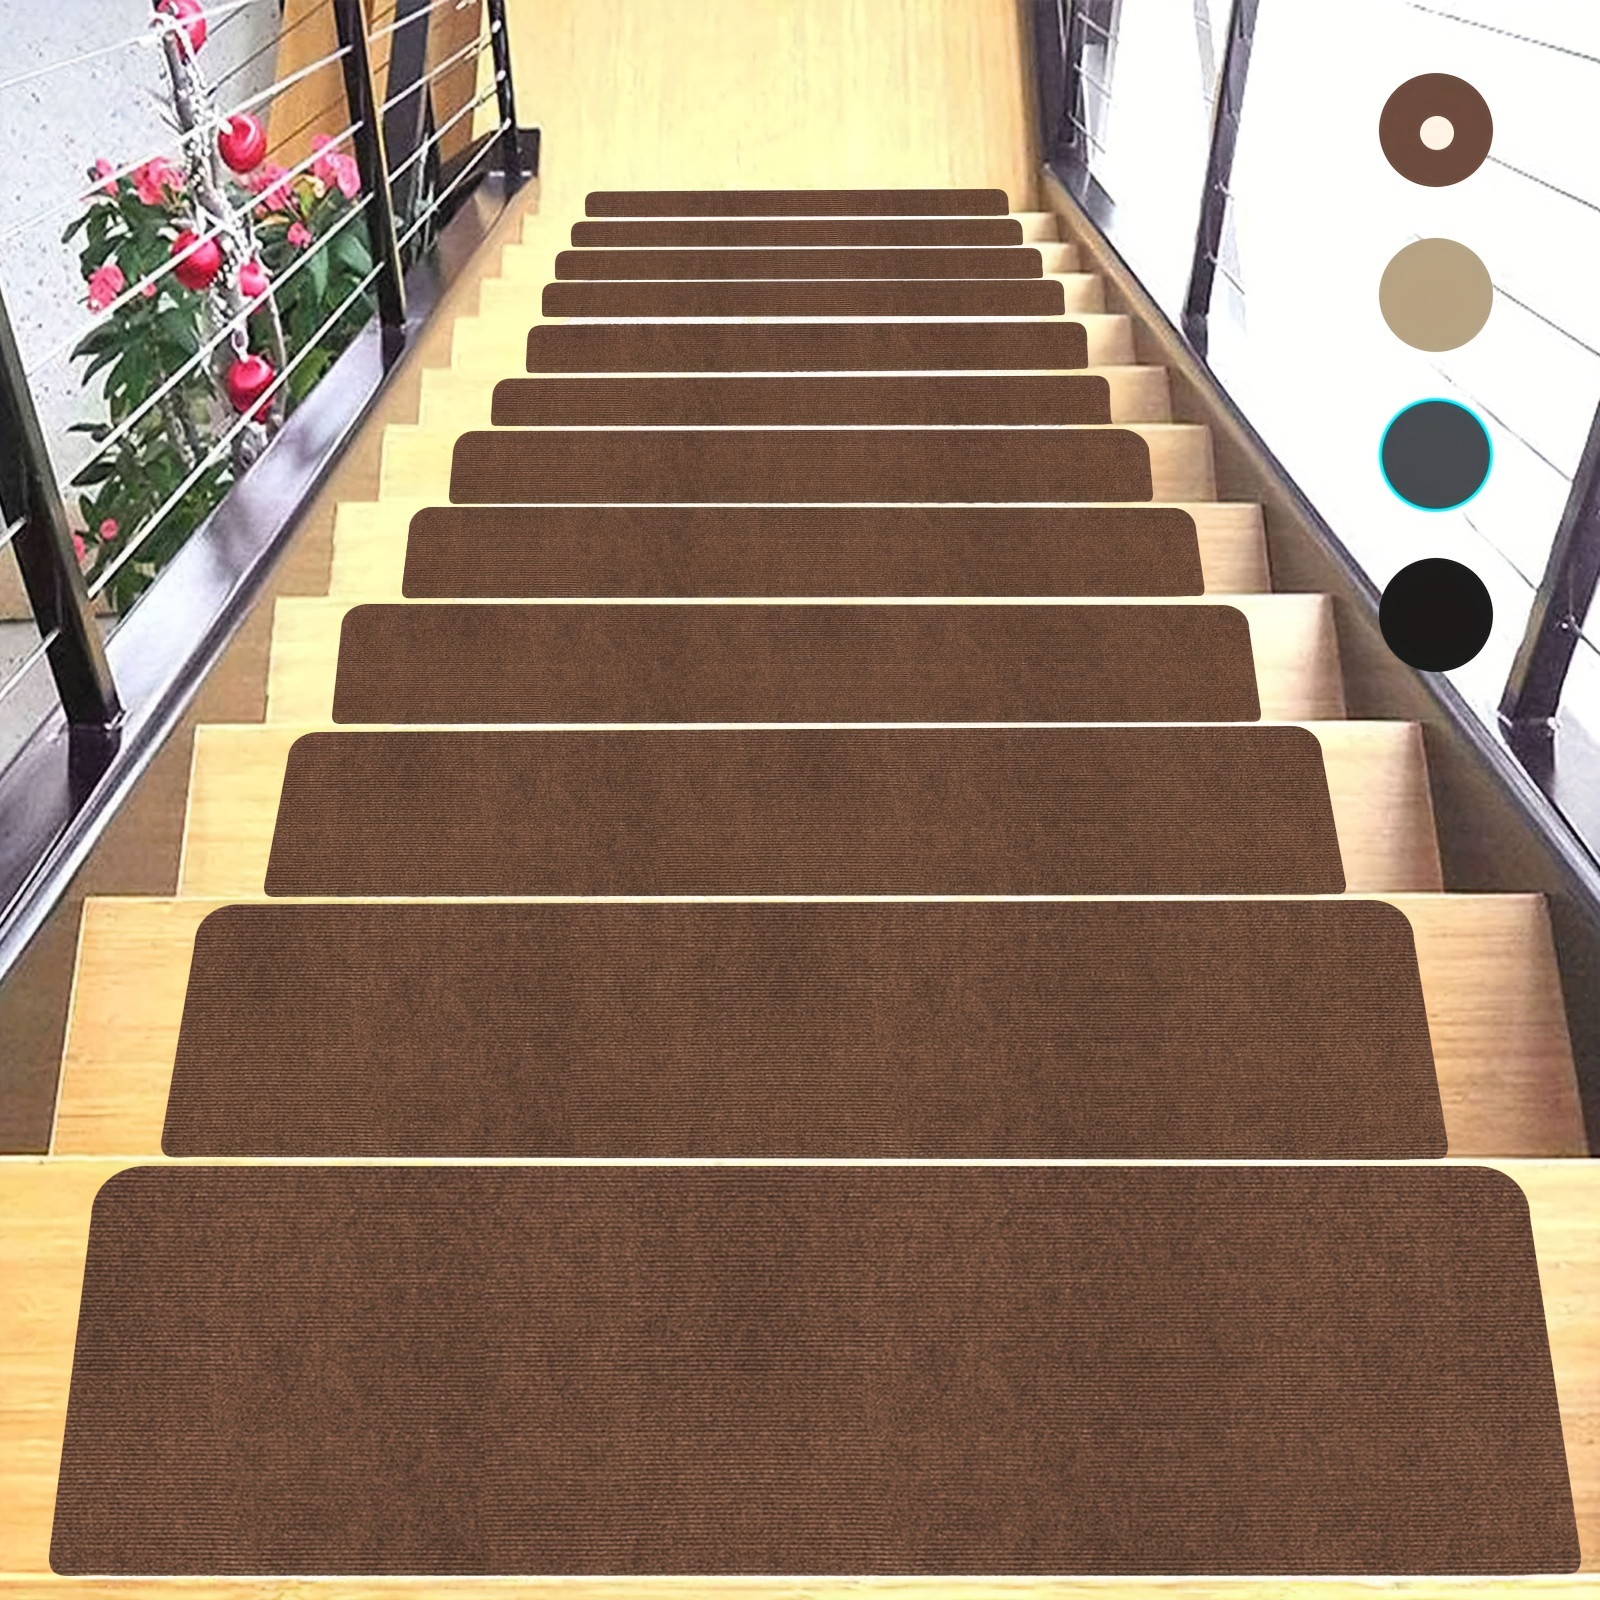 RIOLAND Stair Treads Carpet Non-Slip Indoor 15 PCS Wood Stair Treads Rugs  Anti Moving Modern Stair Runners Safety for Kids Dogs, 8 X 30, Diamond